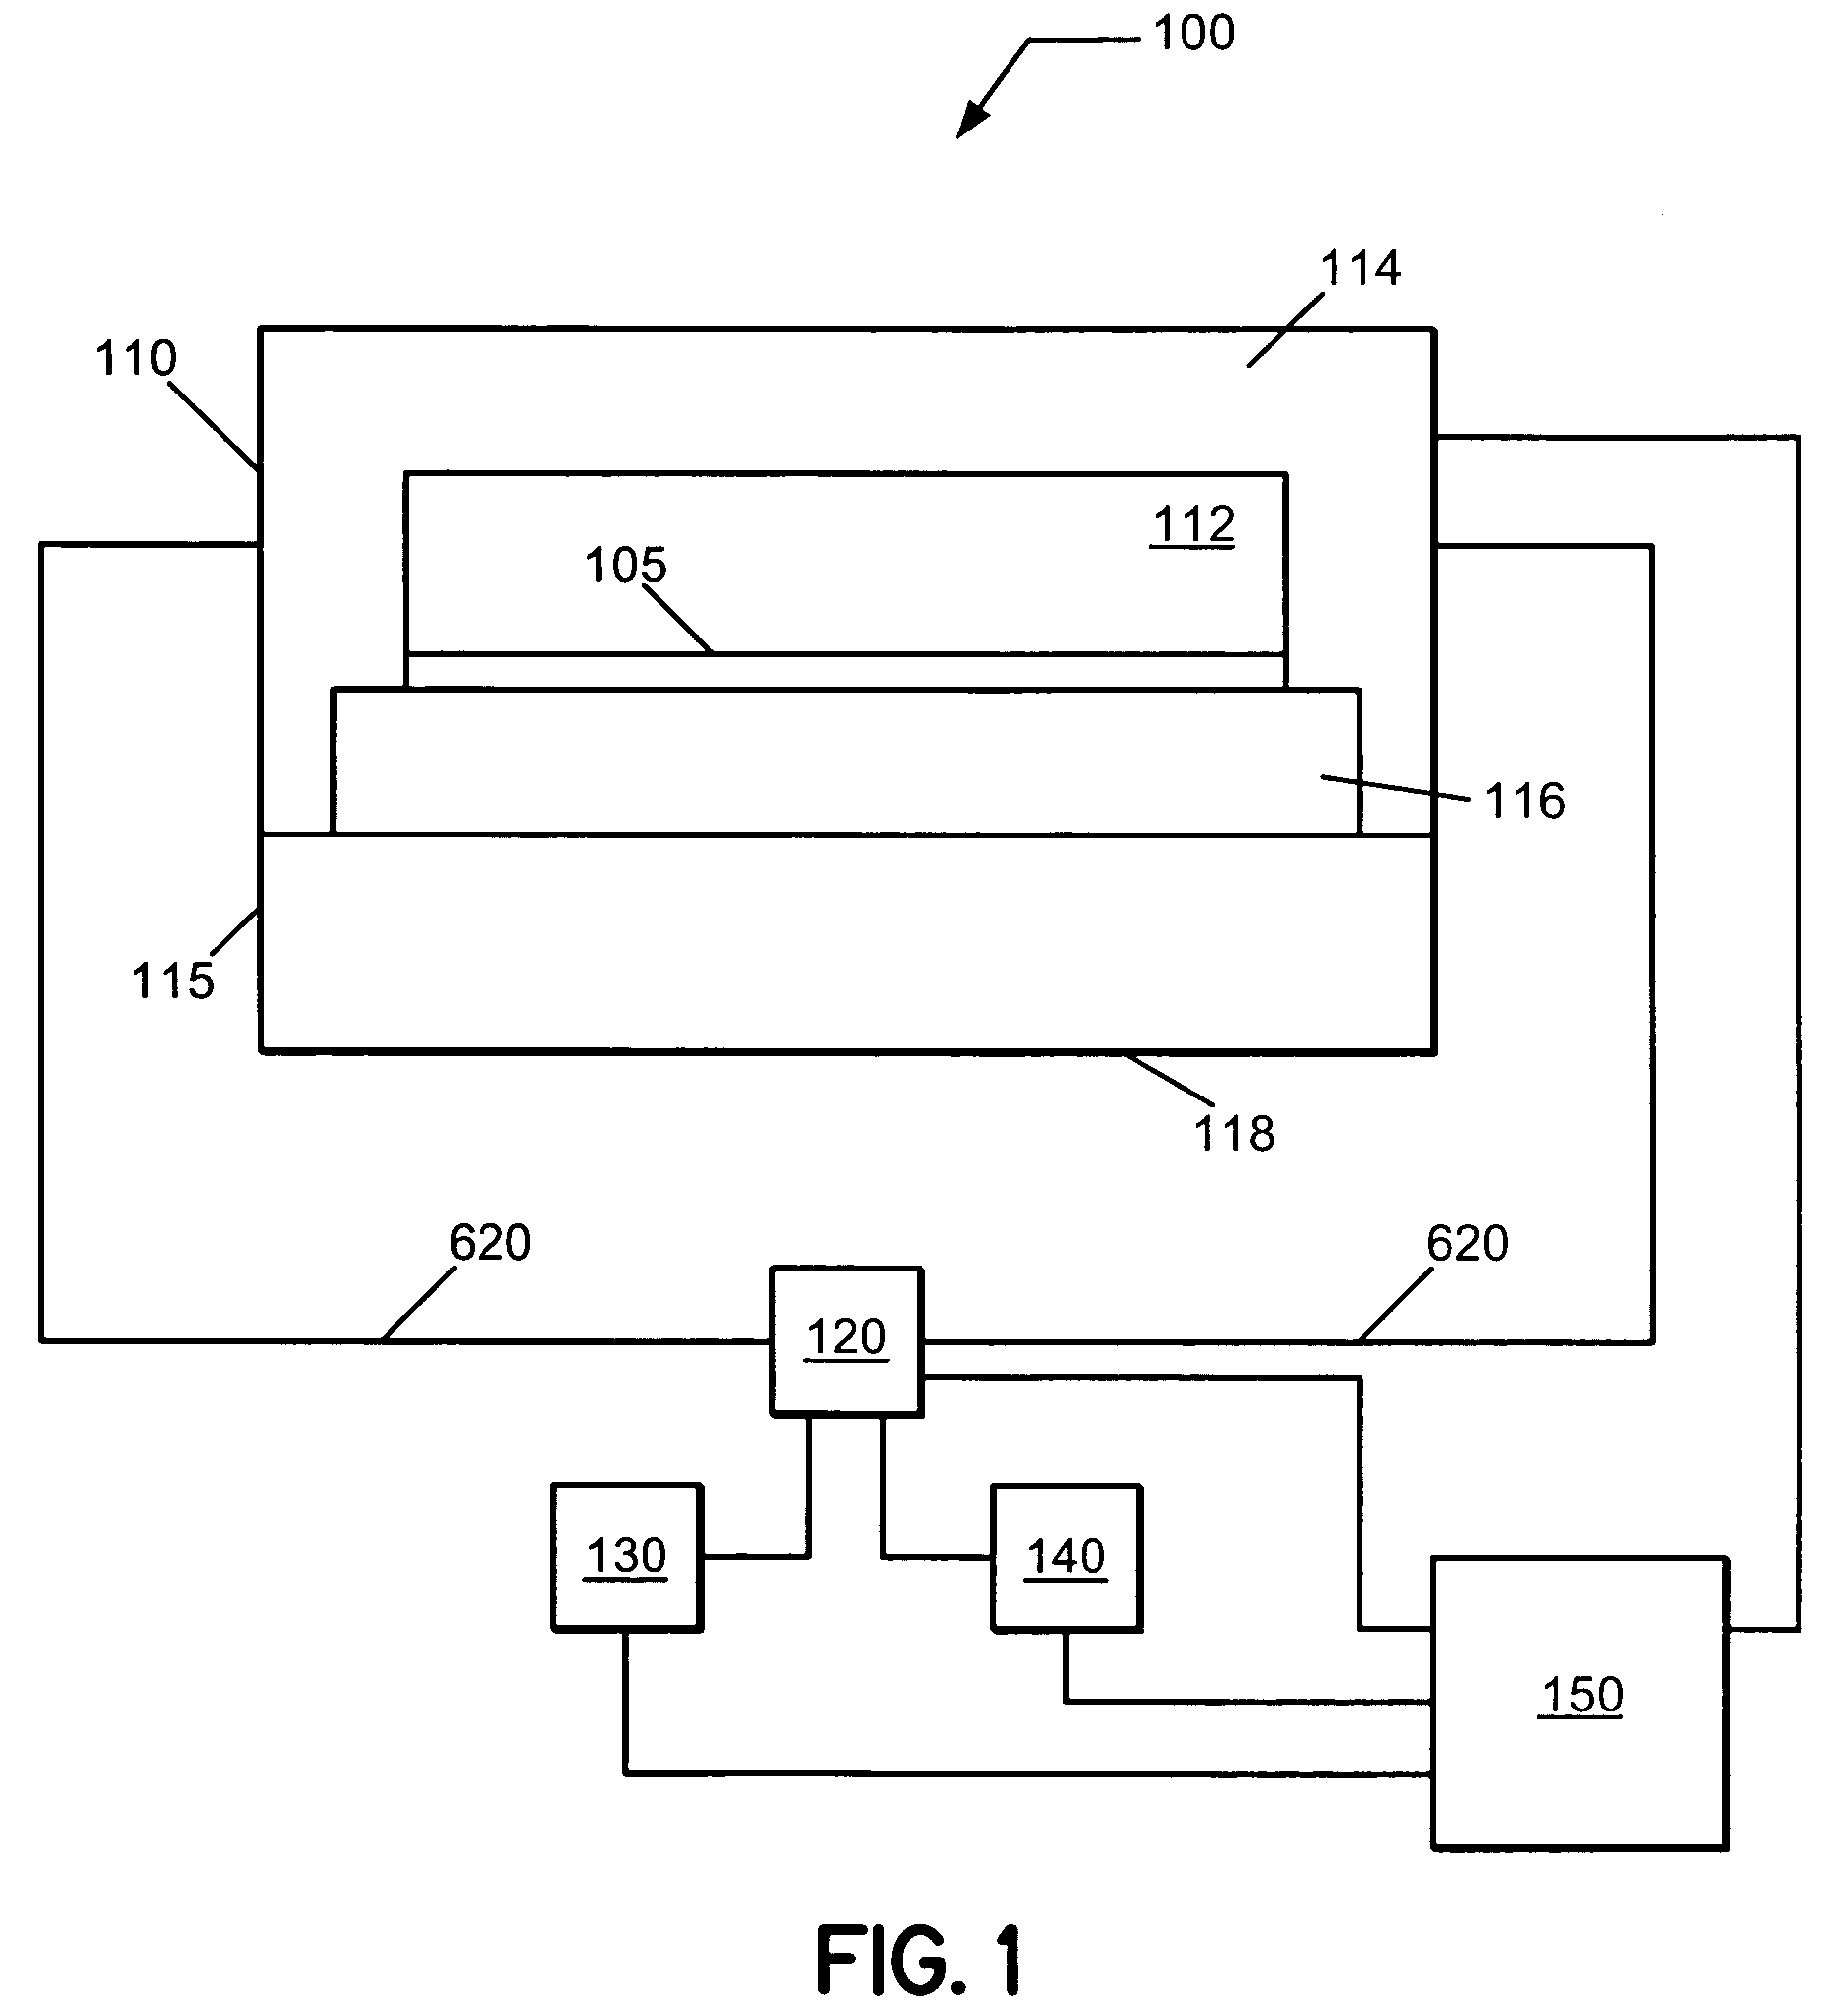 Method and system for cooling a pump